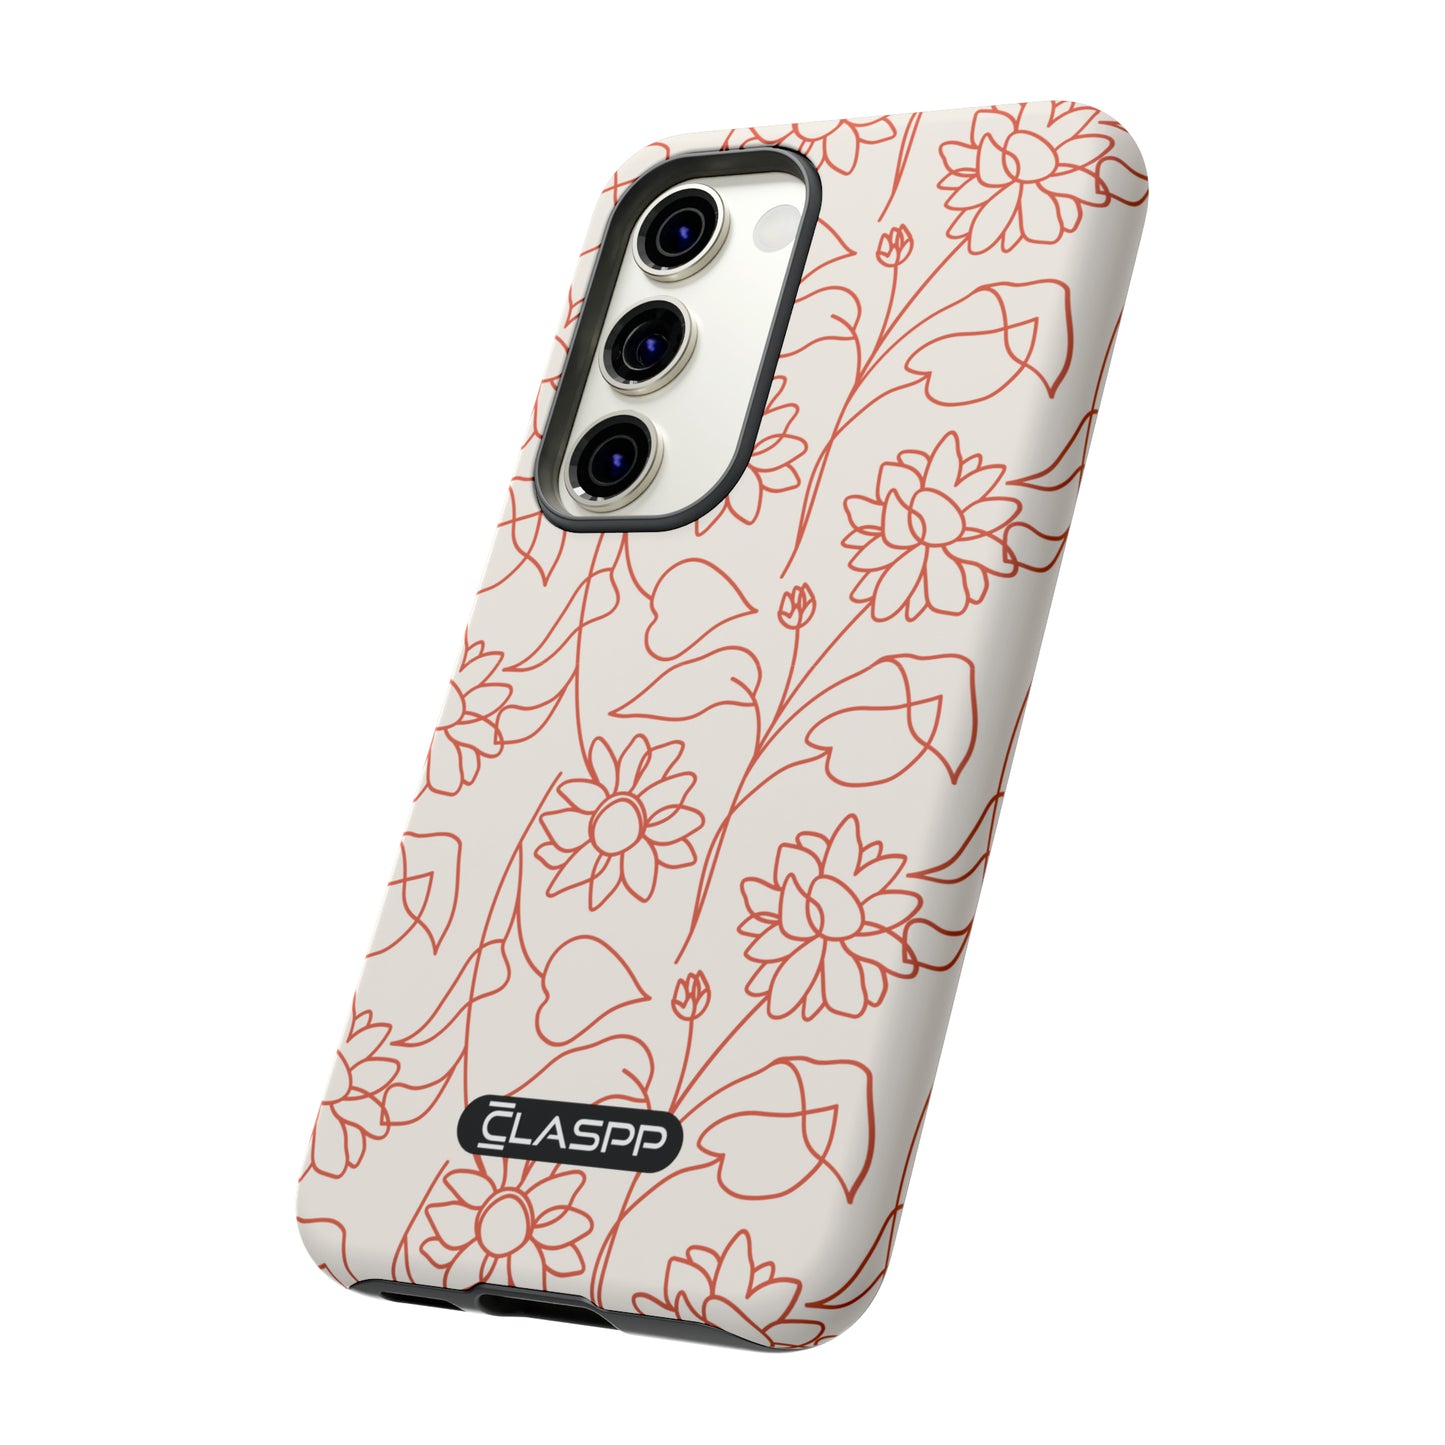 Exquisite Flower | Hardshell Dual Layer Phone Case